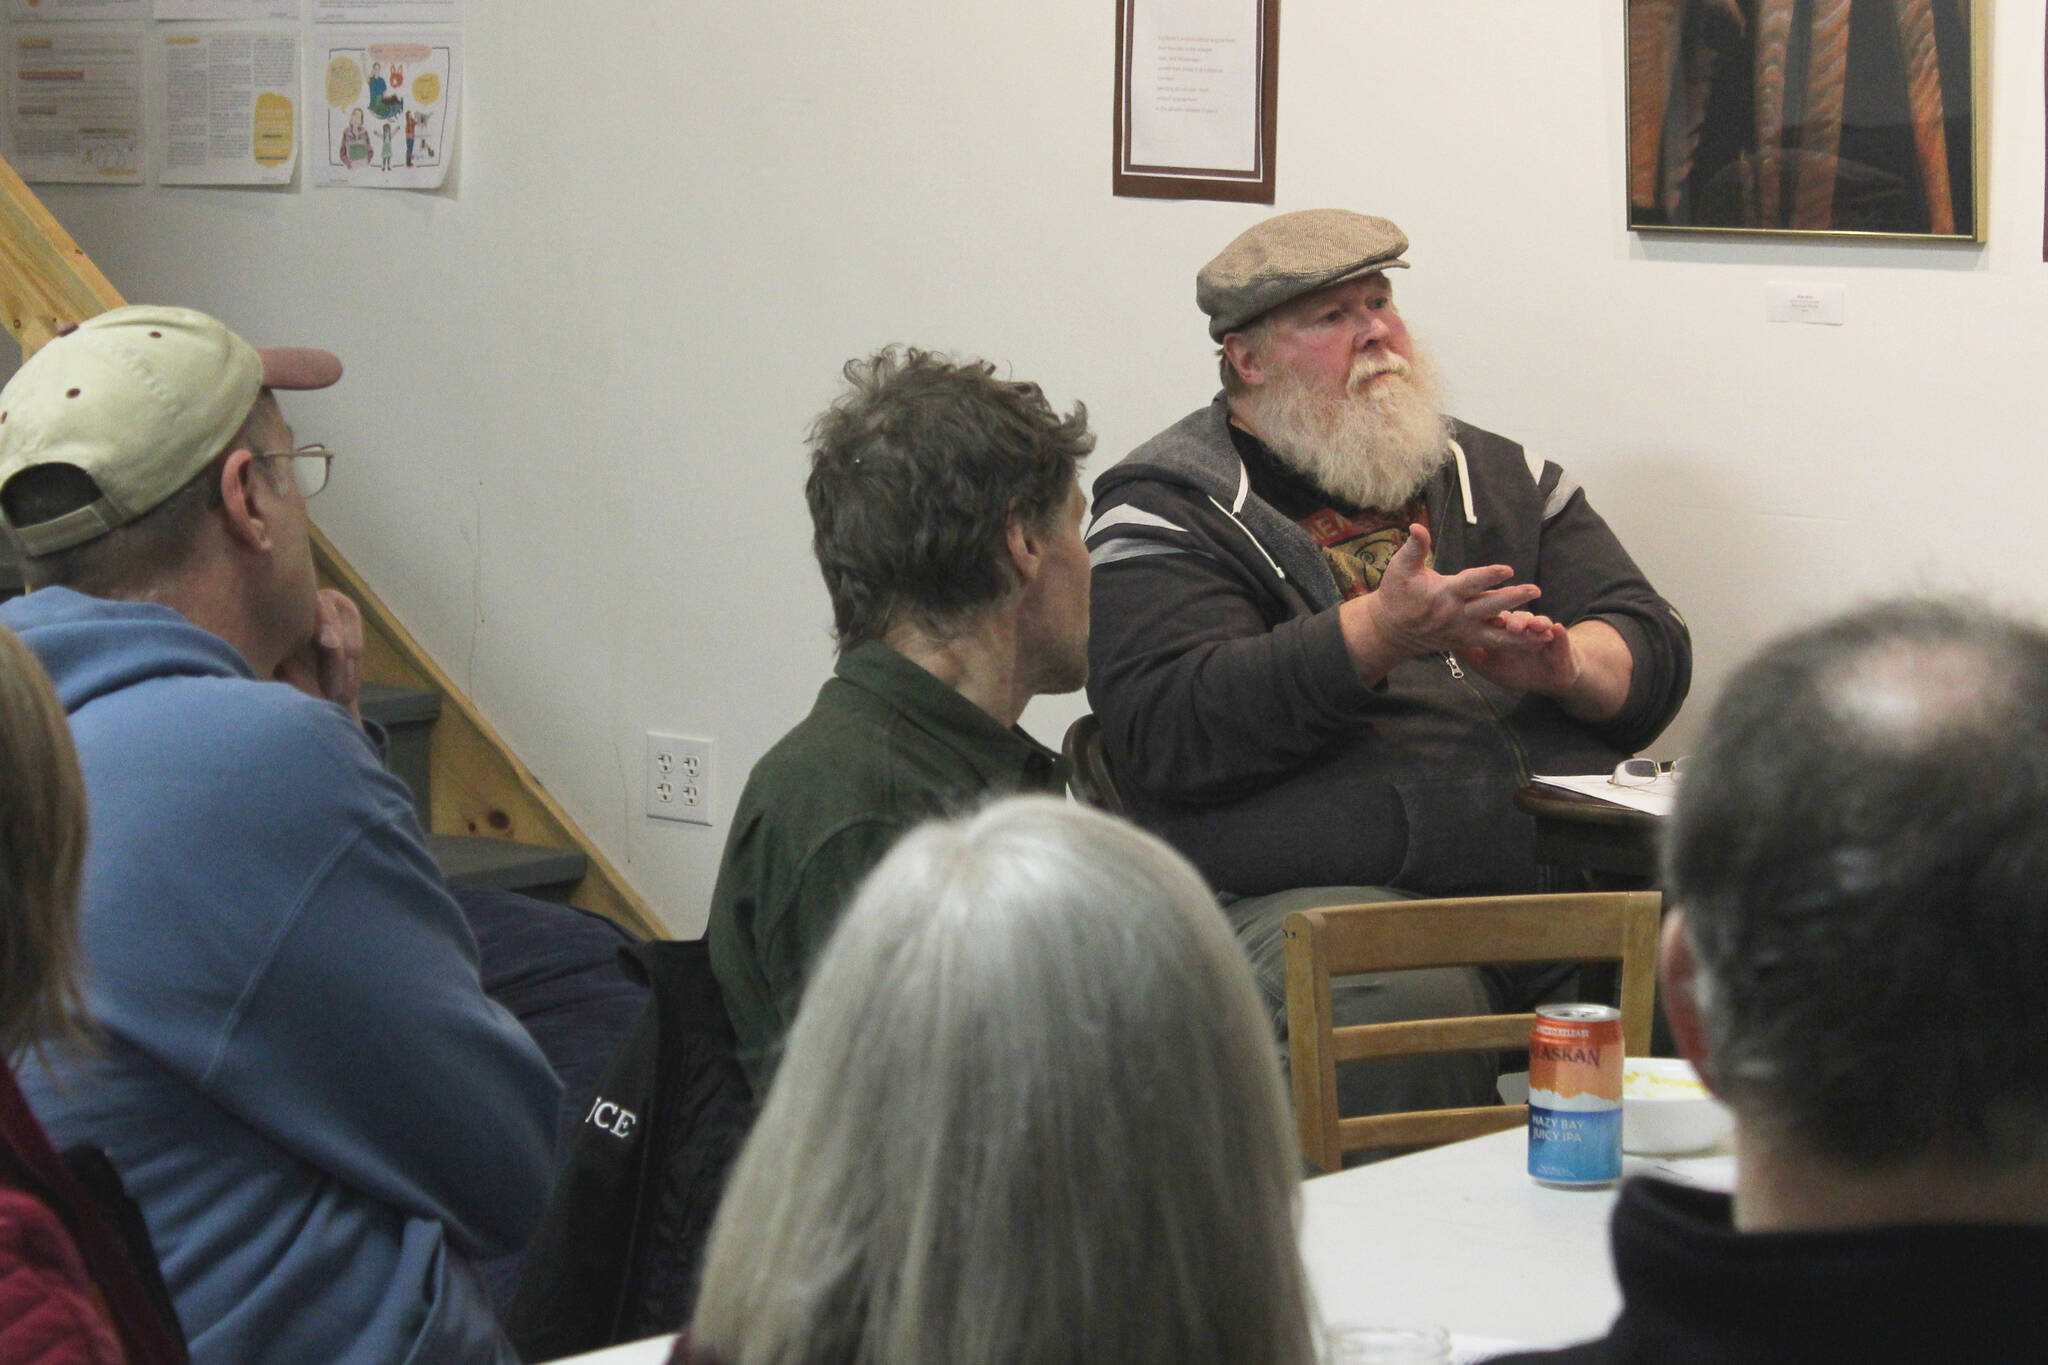 Larry Opperman (second from right) speaks during a community meeting about retrofitting homes to be more energy efficient at the Cook Inletkeeper Community Action Studio on Tuesday, Dec. 5, 2023, in Soldotna, Alaska. (Ashlyn O’Hara/Peninsula Clarion)